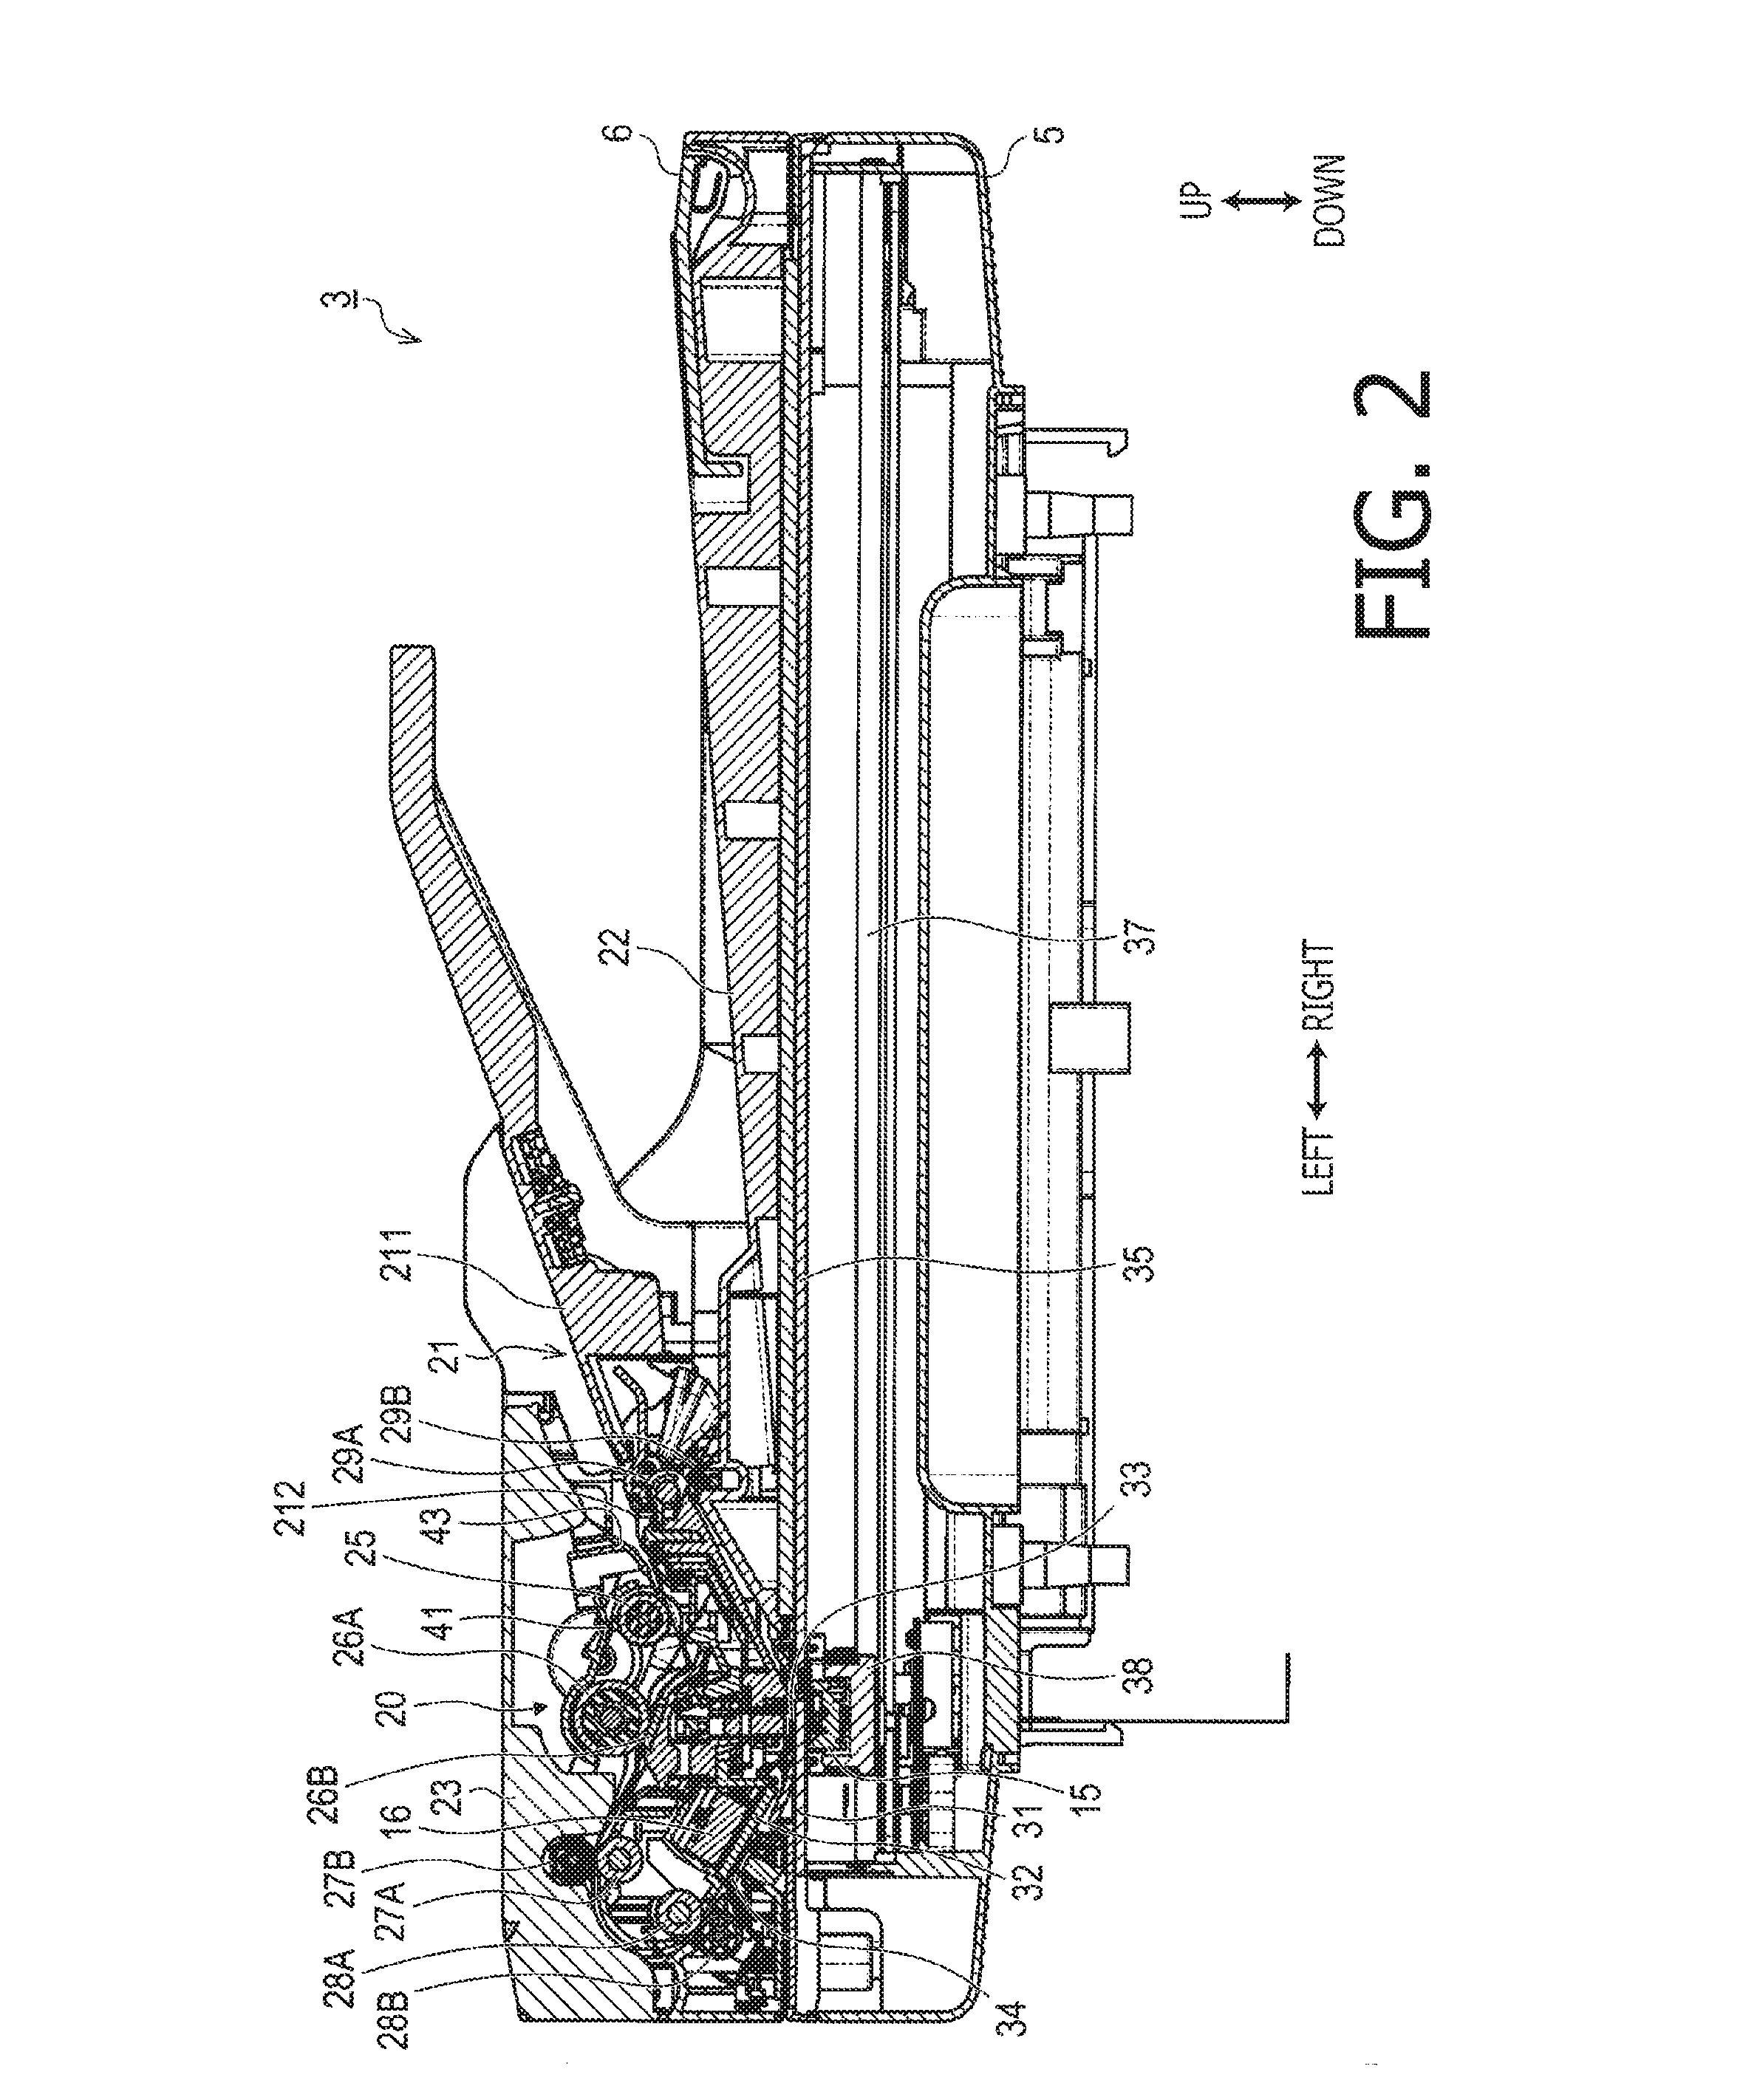 Sheet Conveyer and Image Reading Apparatus